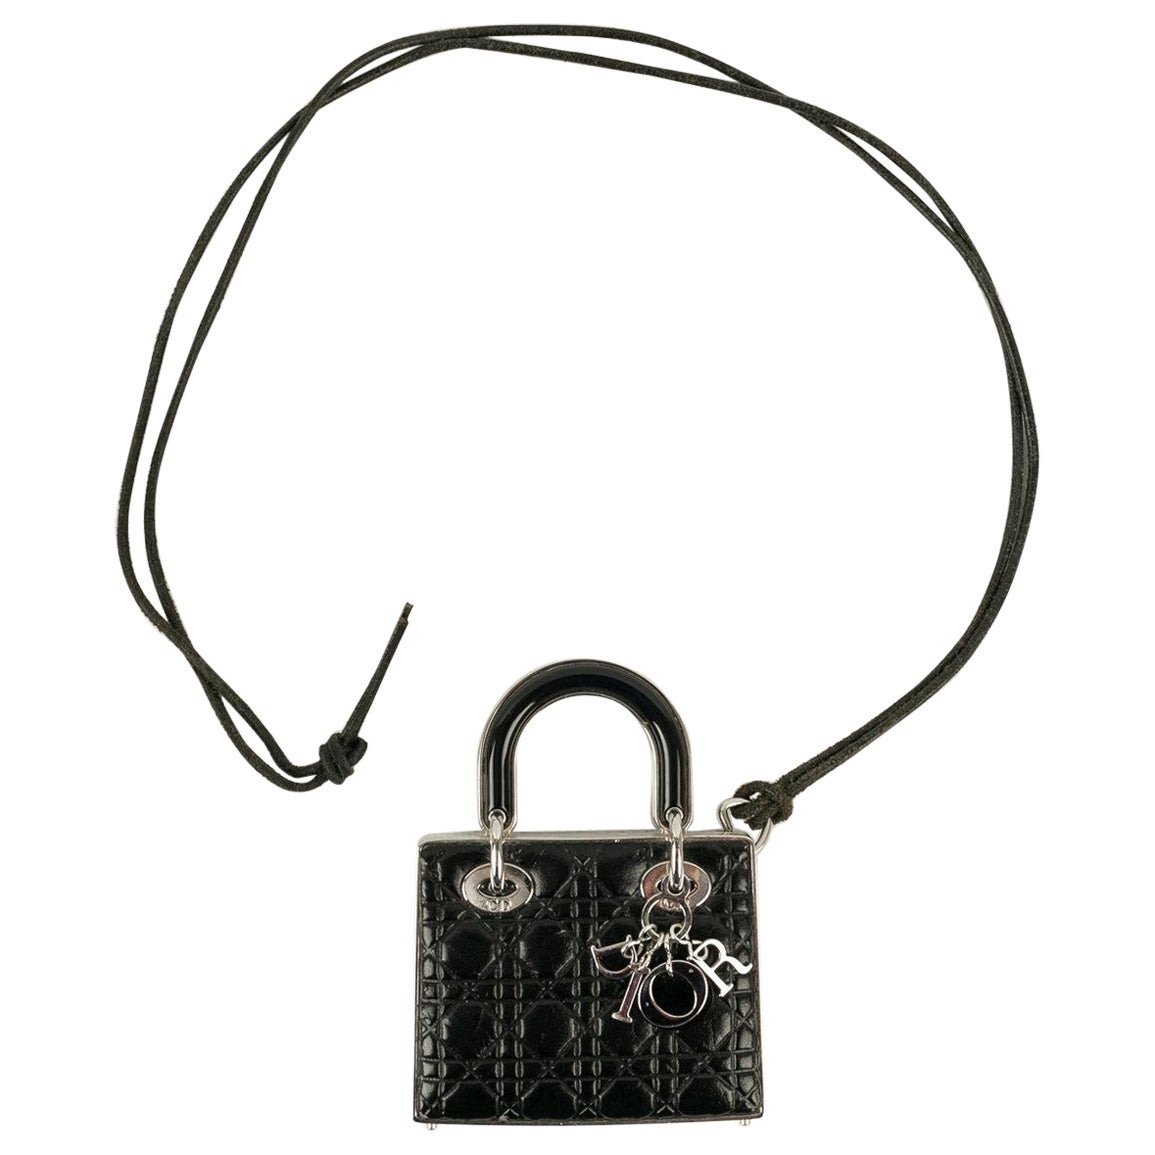 Christian Dior Jewelry Accessory "Lady Dior" Bag For Sale